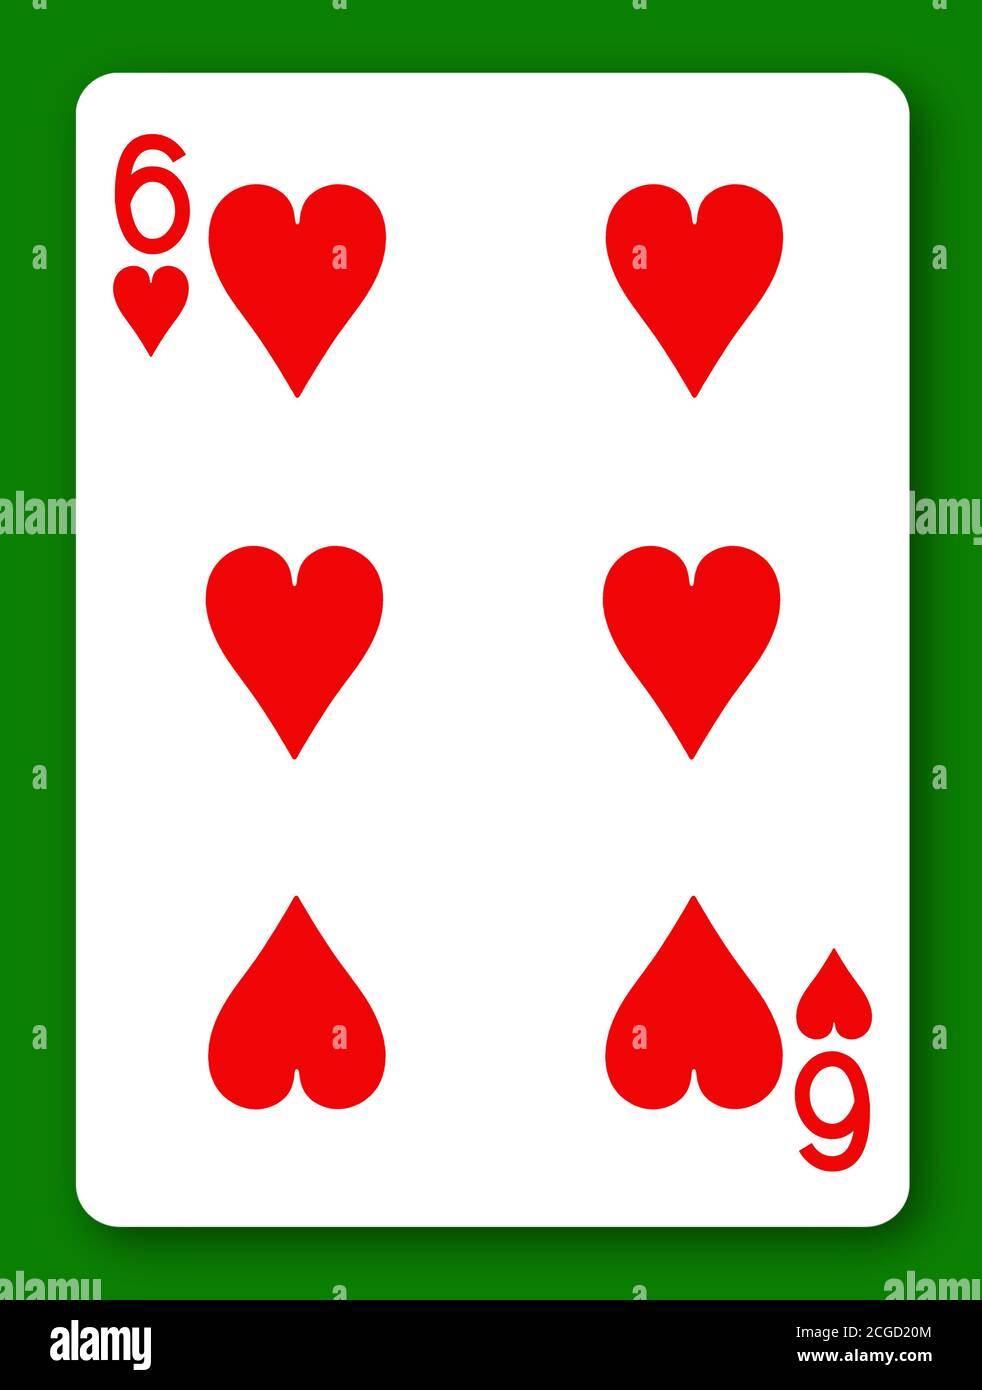 6 Six of Hearts playing card with clipping path to remove background and shadow Stock Photo